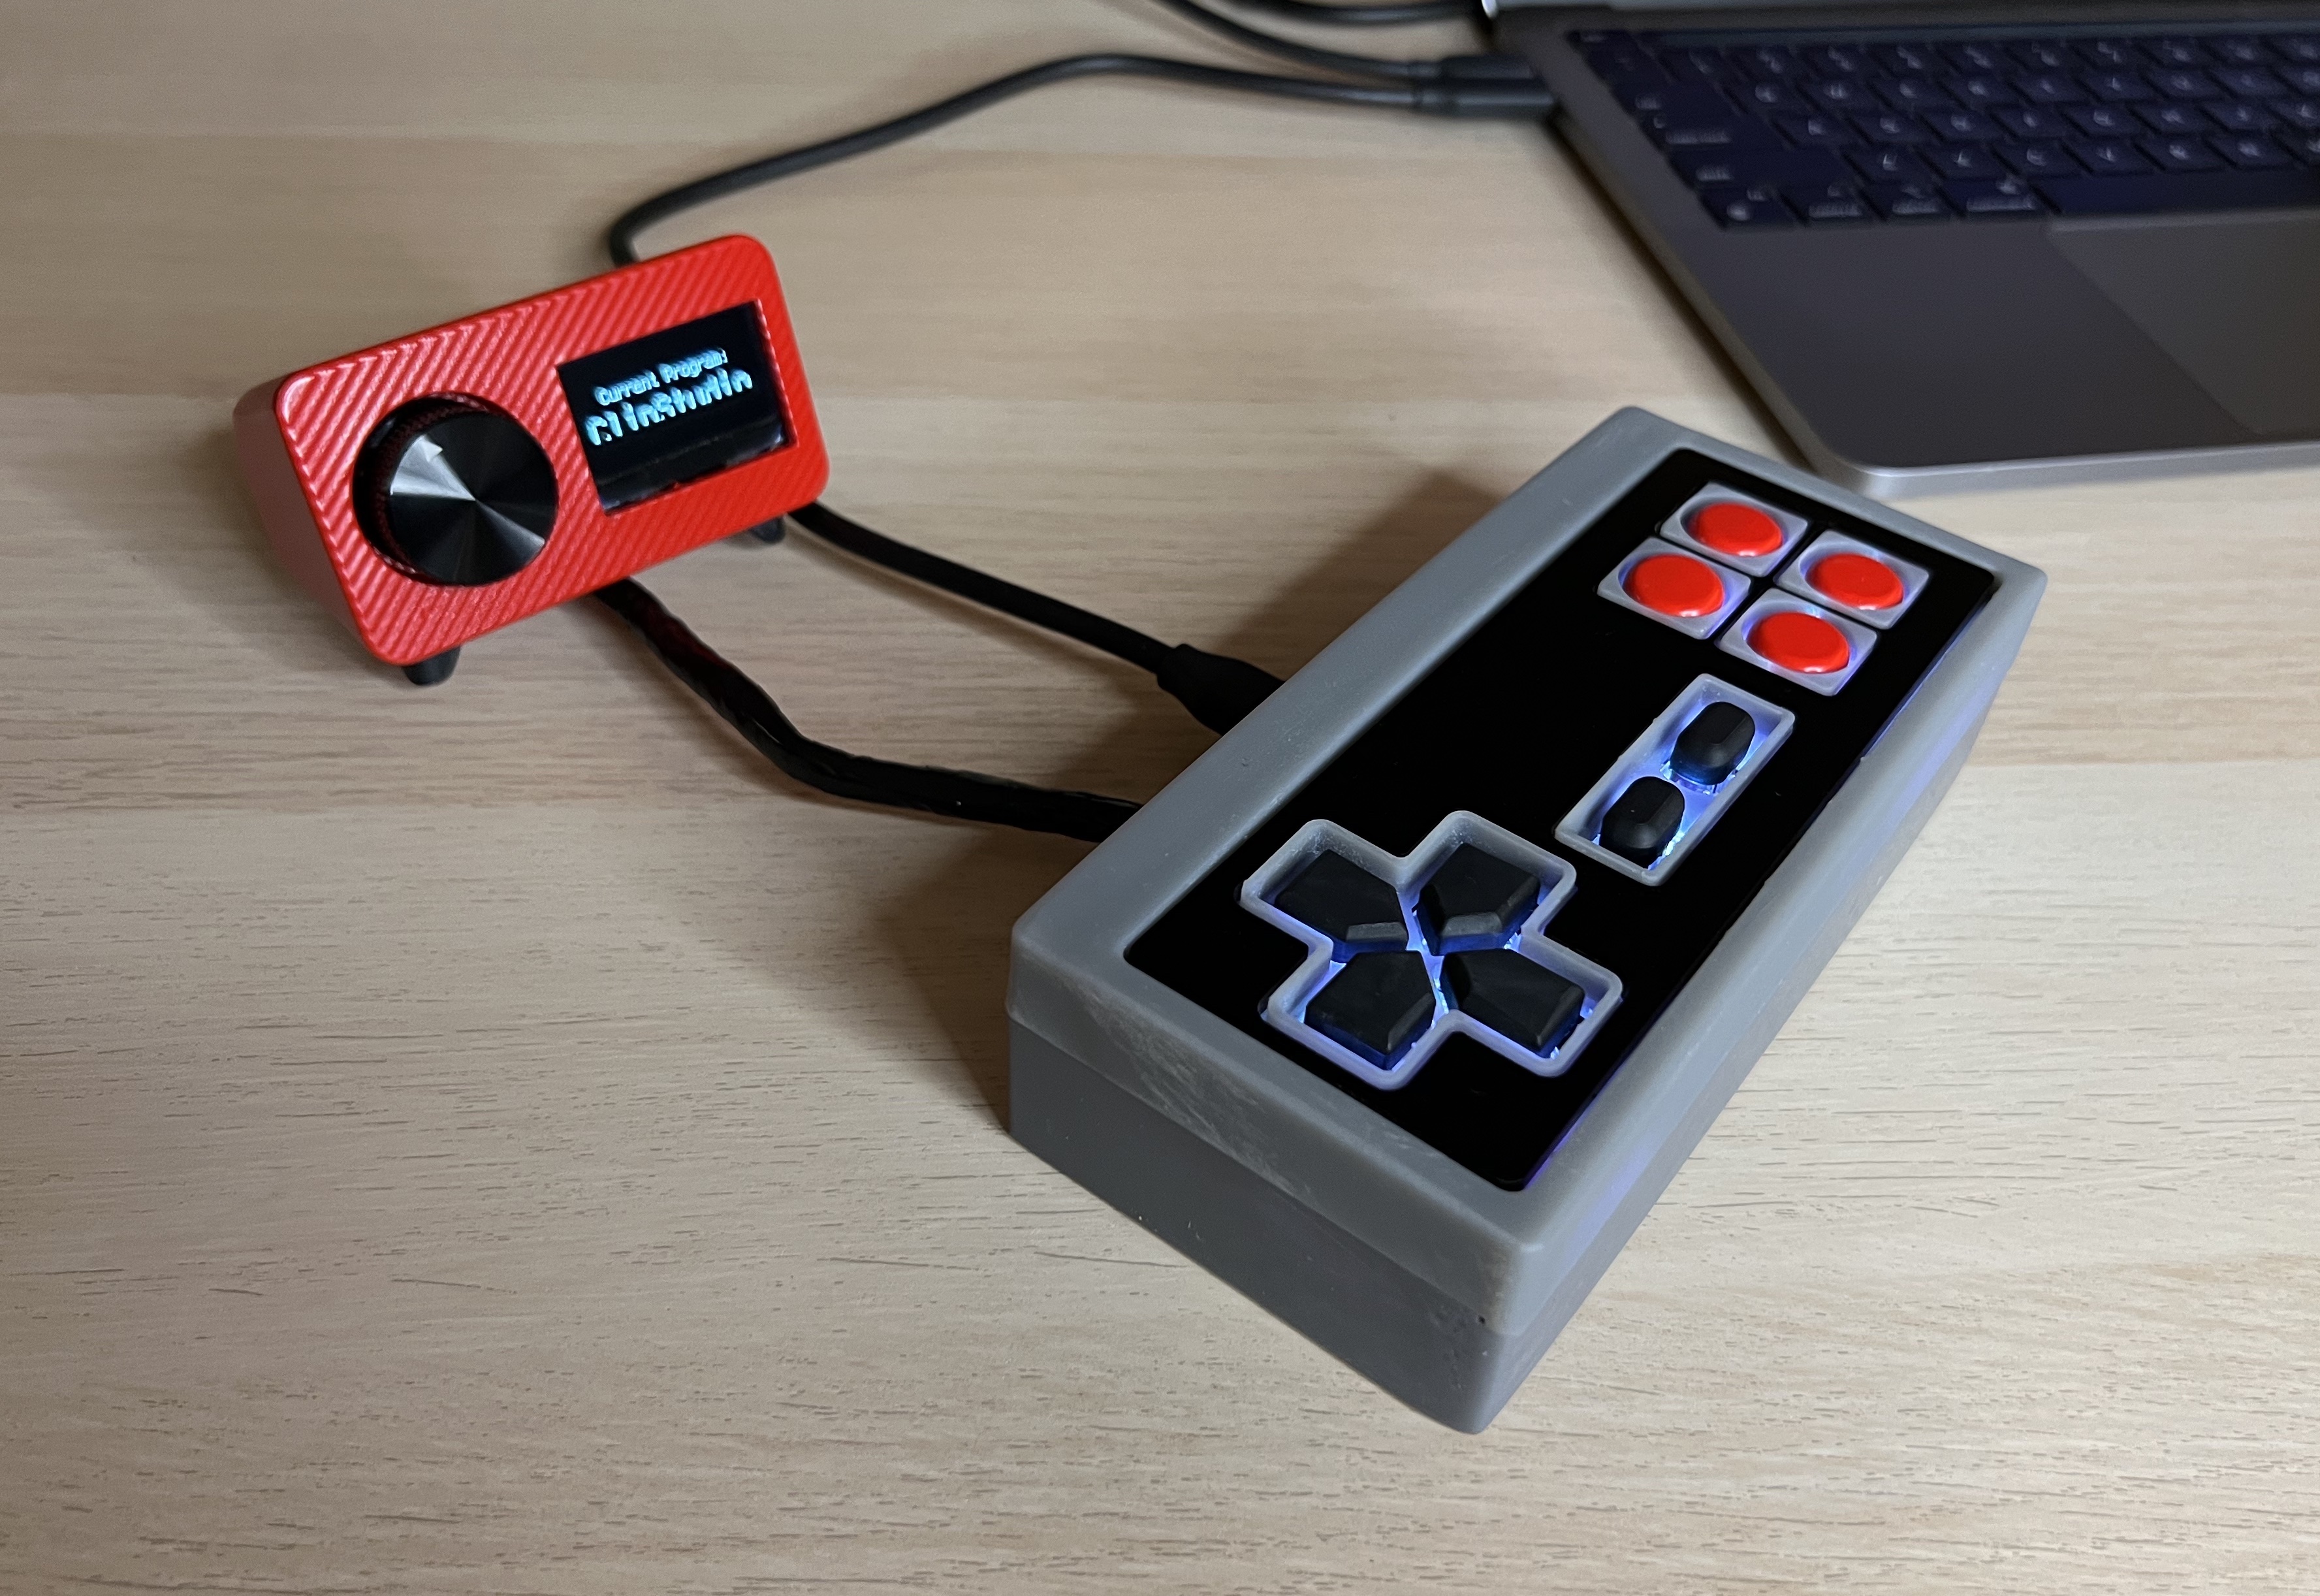 Final shortcut keyboard, with NES controller keypad and retro TV knob and screen.